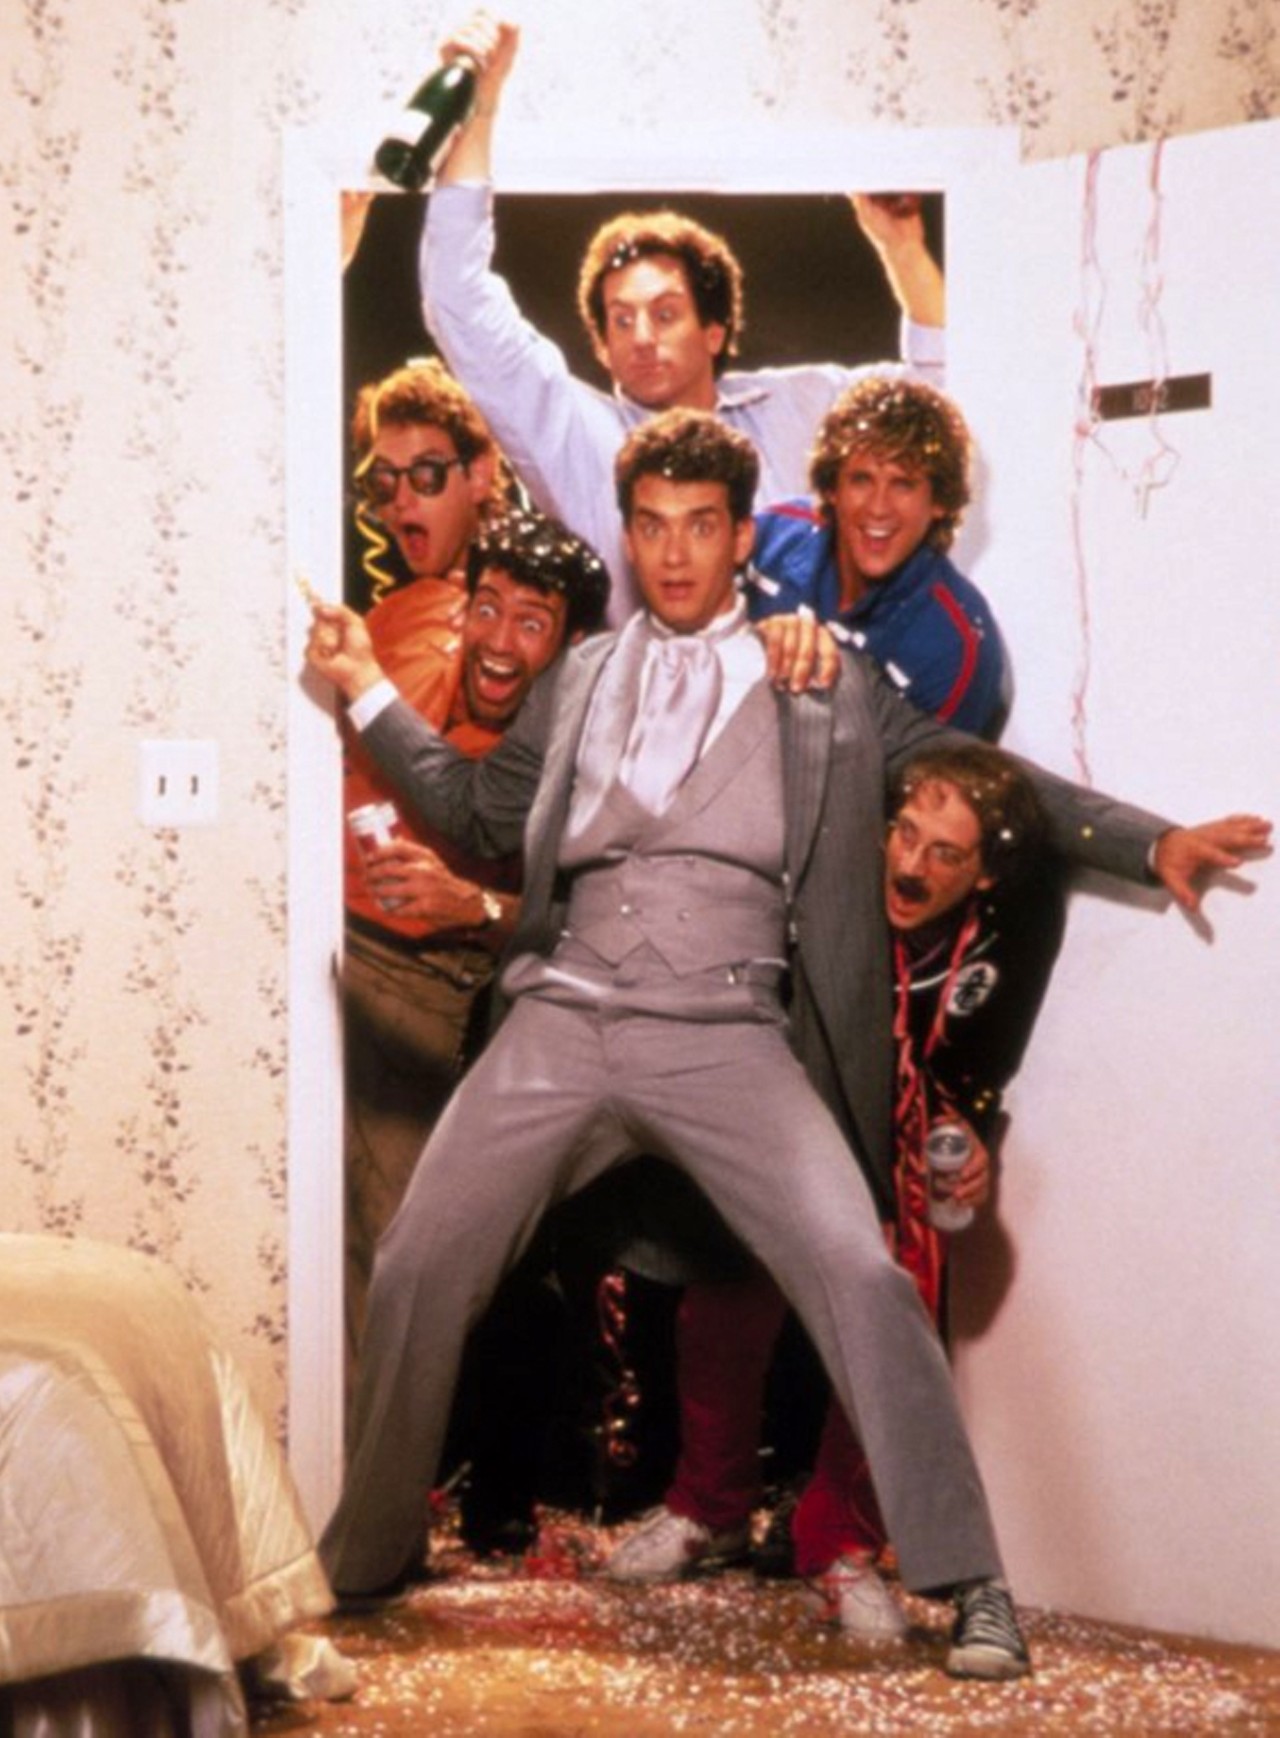 14. Bachelor Party (1984)Before The Hangover, there was this 1984 movie, starring Tom Hanks as Rick Gassko, a man-child who decides to married. The plot goes like this: 
1. Marriage proposal
2. ??? 
3. Honeymoon